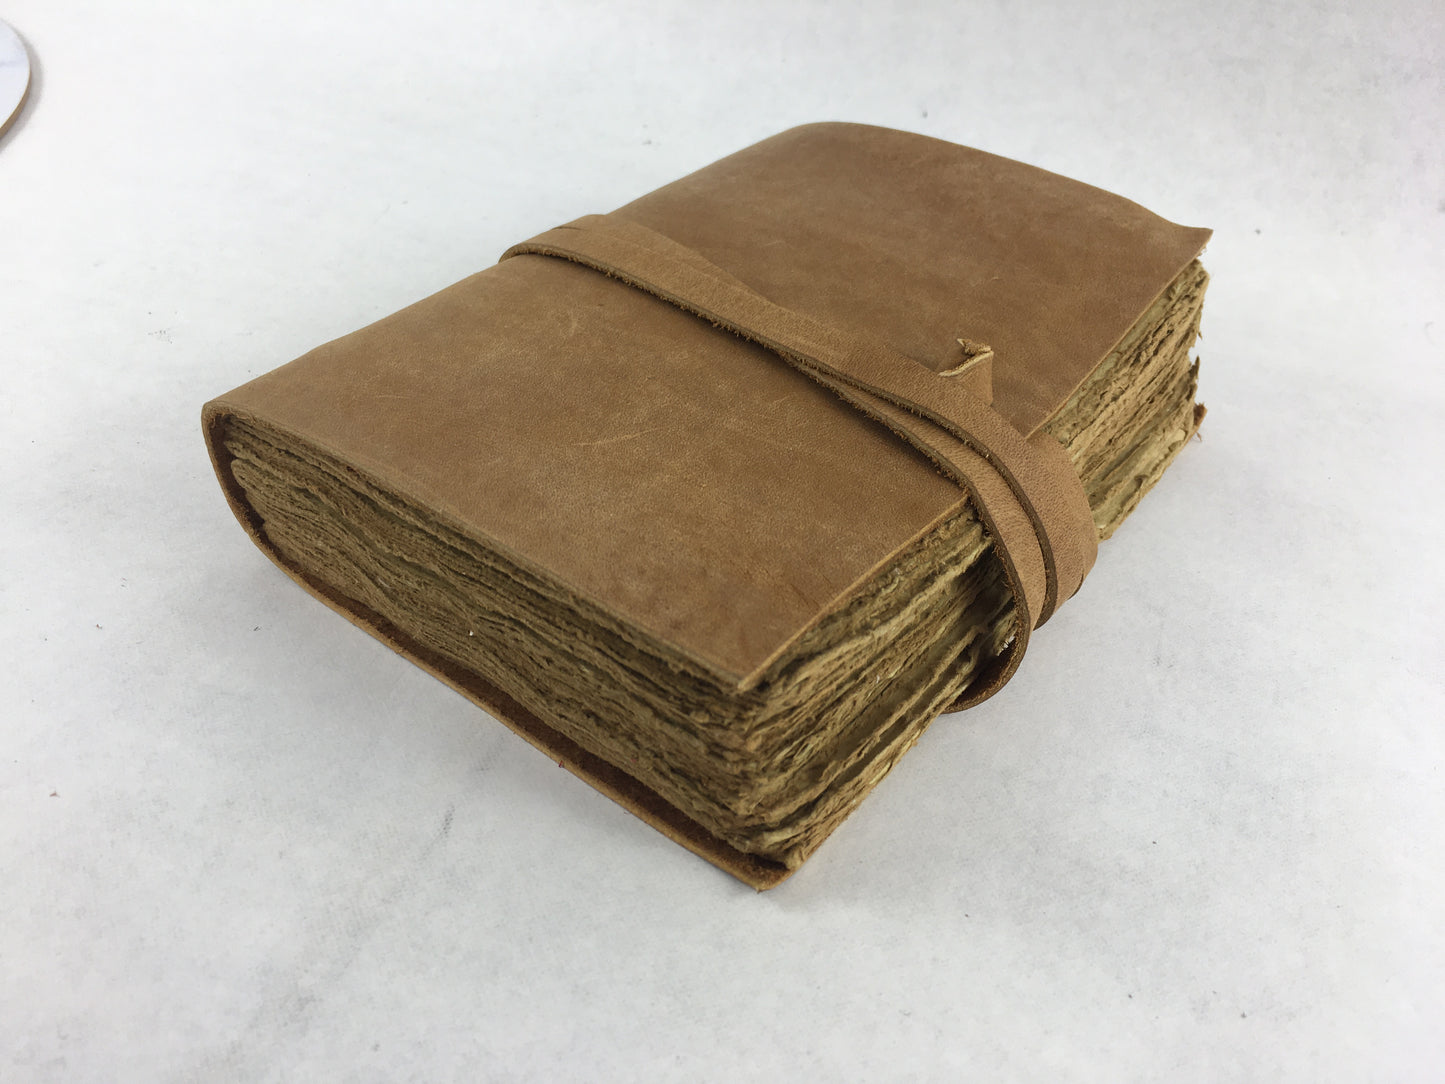 Quality Handmade Leather Journal- THICK 100% Cotton paper- Aged paper- TBBLJ3